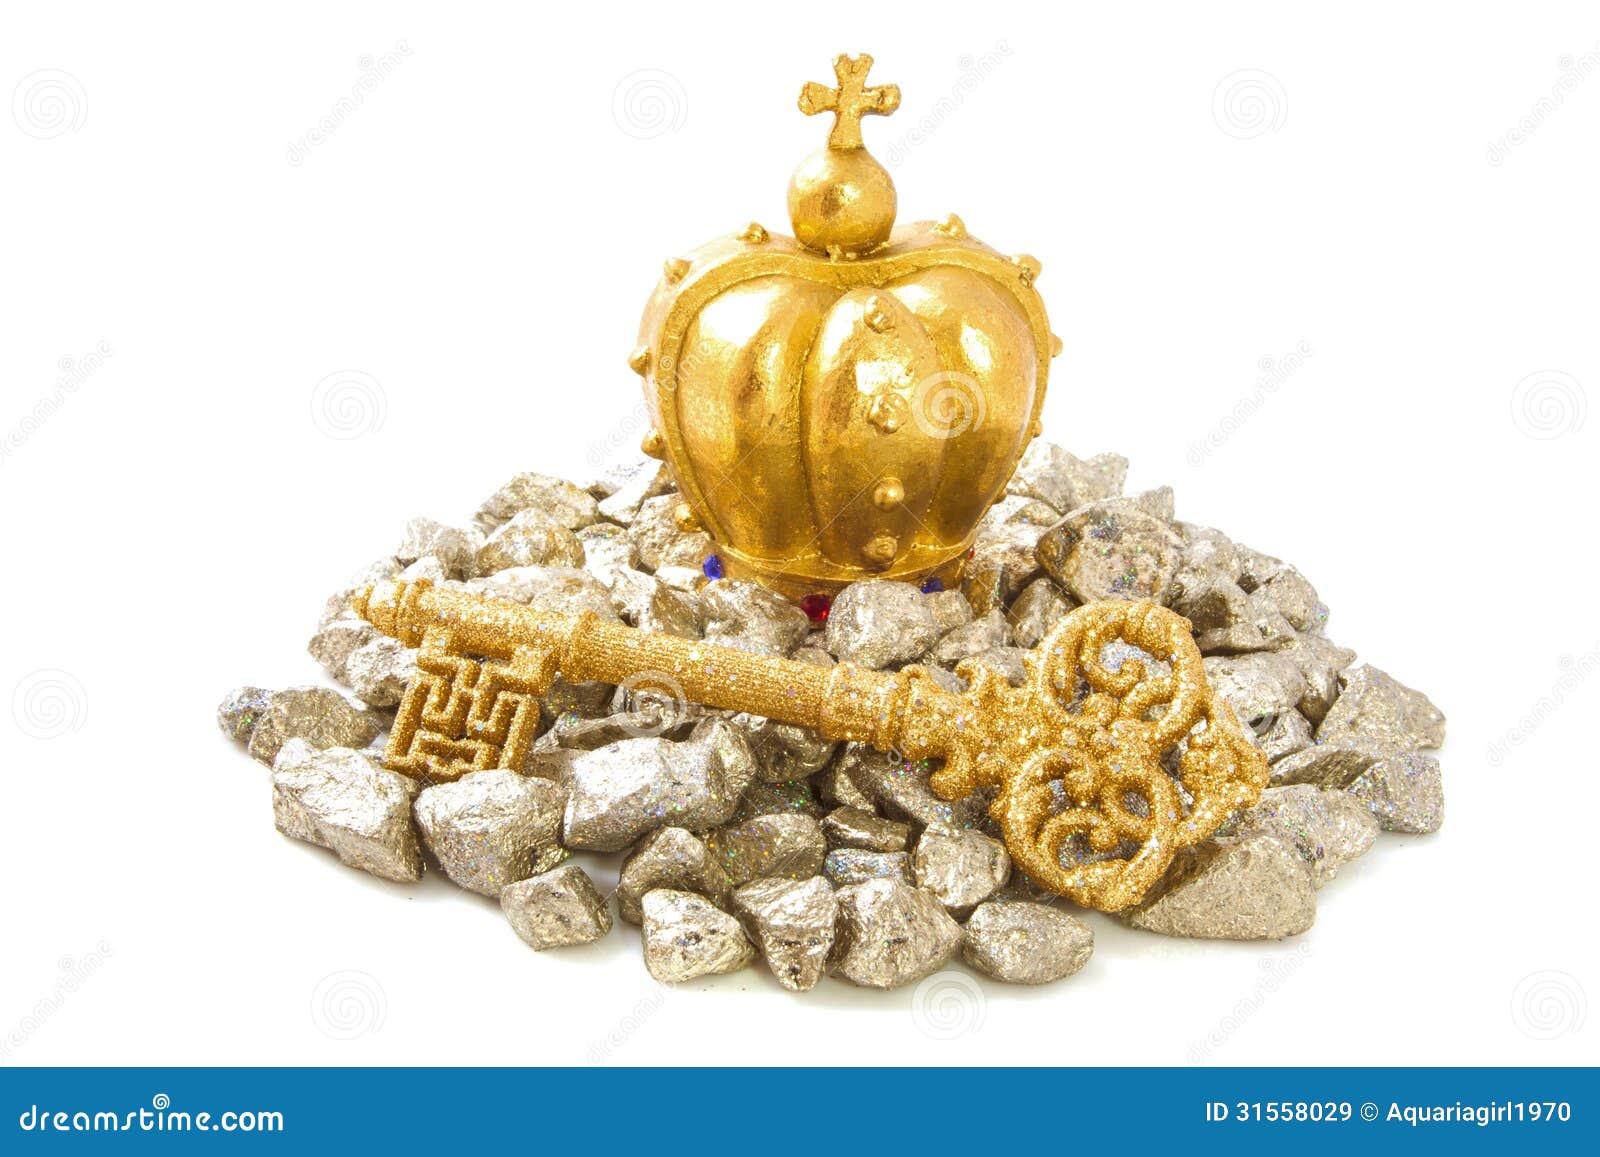 Wealth and glory. Golden key with golden crown on pile golden stones isolated over white